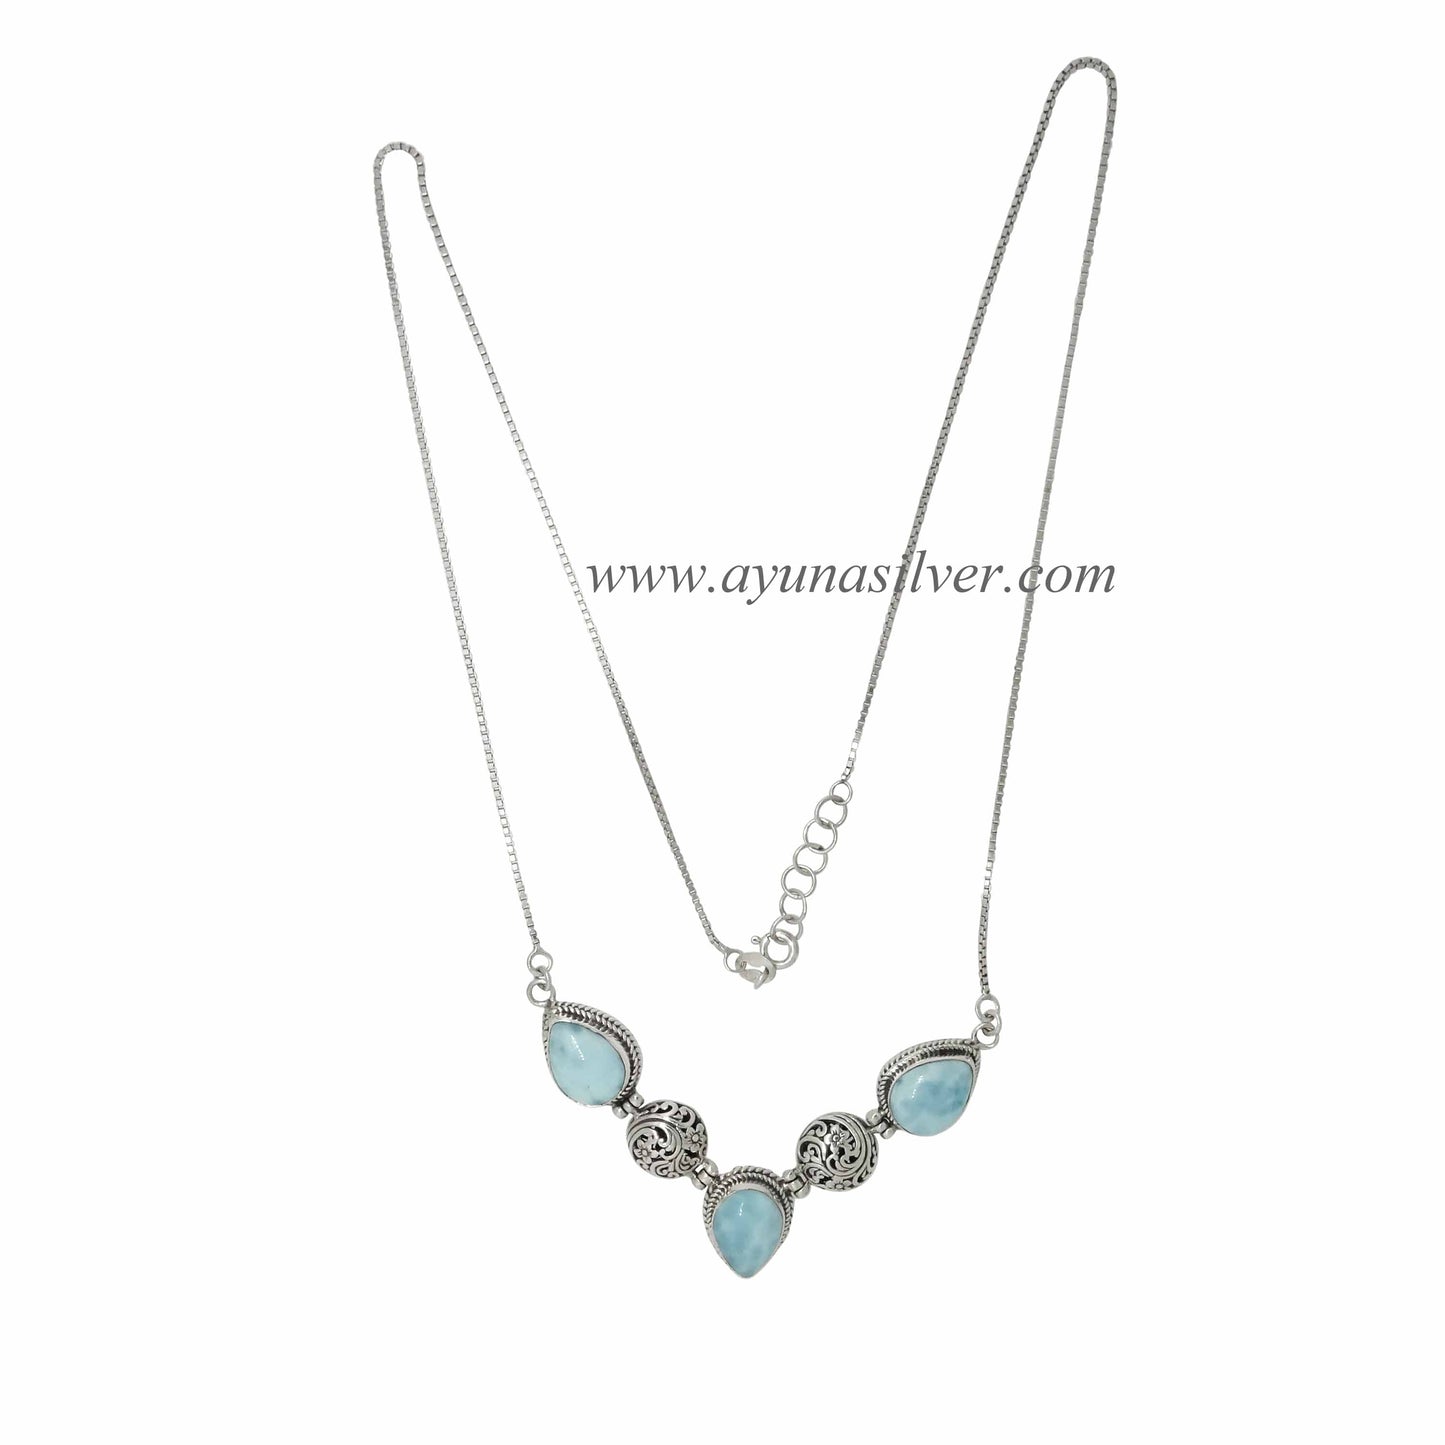 NECKLACE SNC0089_LY S